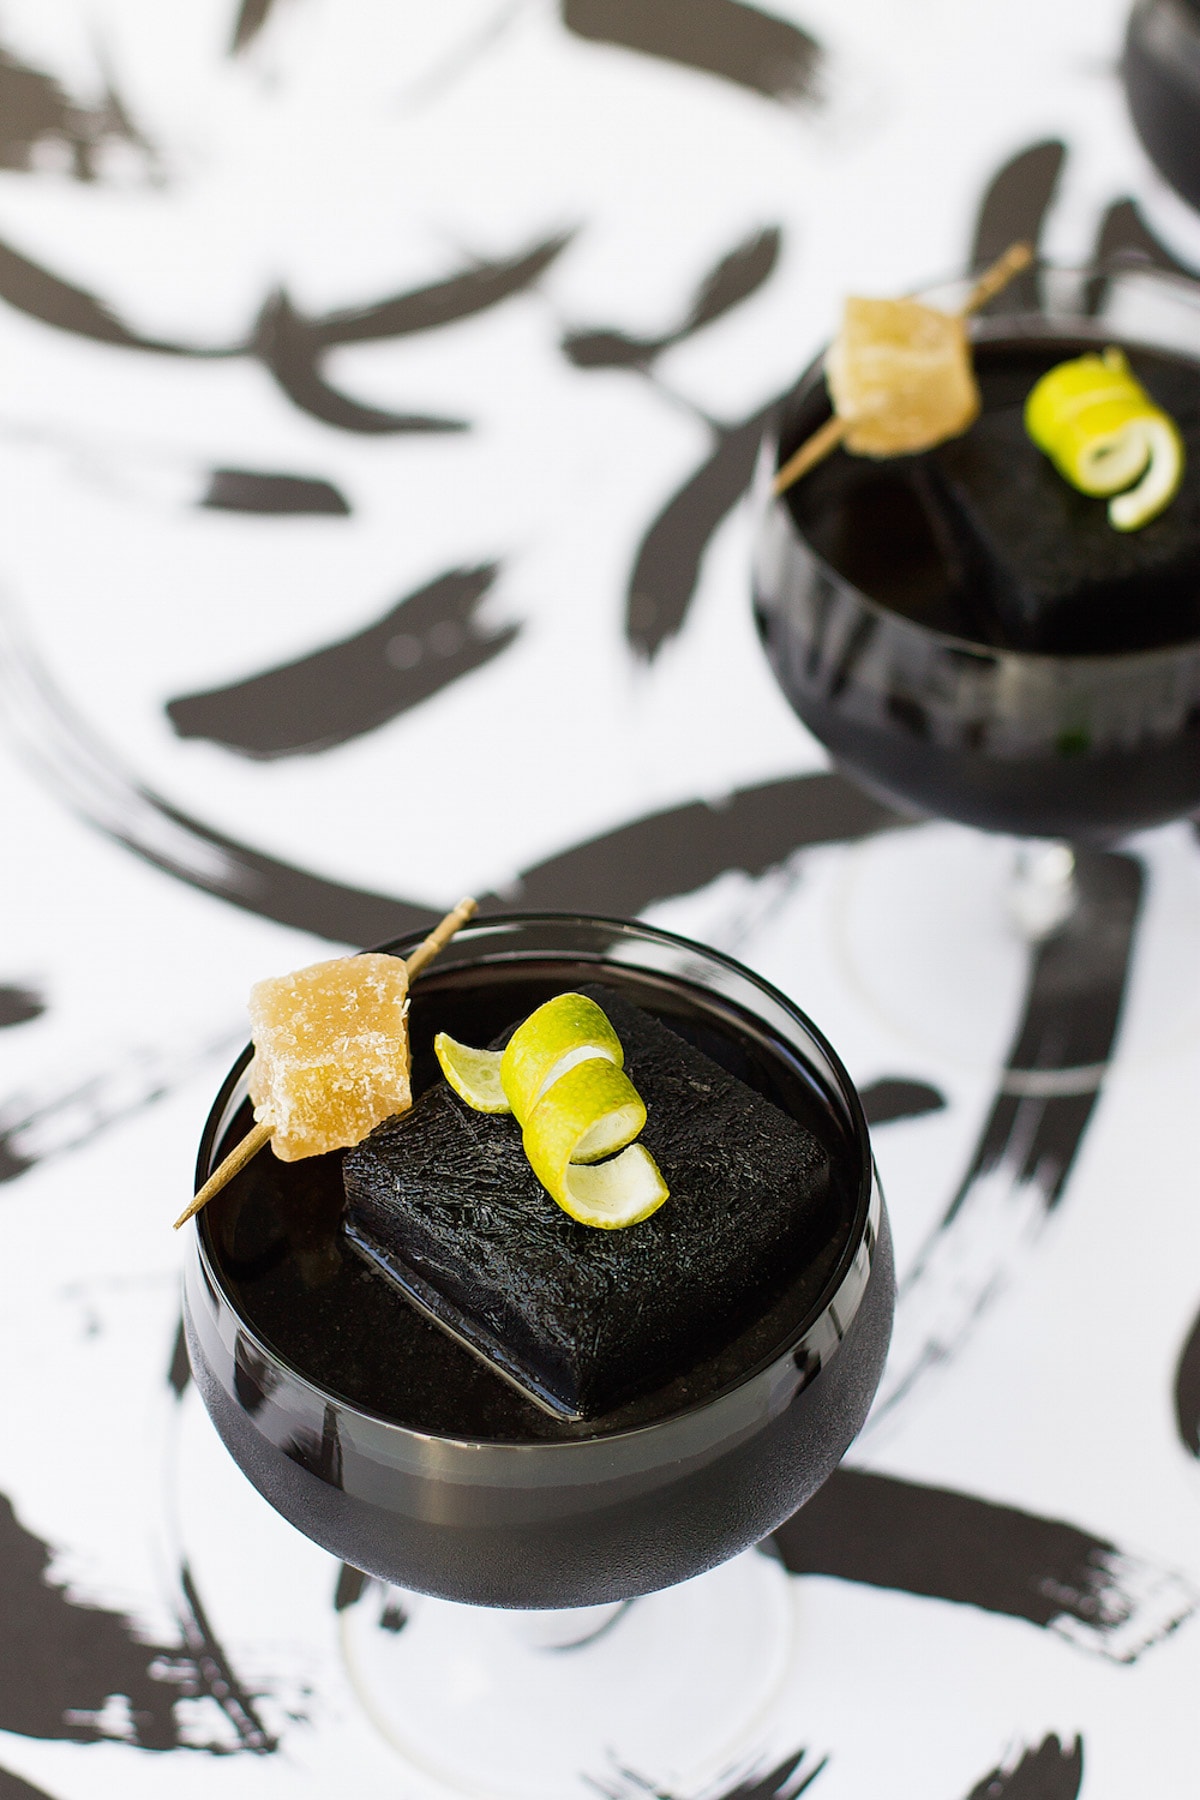 garnished with ginger and a lime - Detoxing Activated Charcoal Cocktail Recipe by top Houston Lifestyle Blogger Ashley Rose of Sugar and Cloth #recipe #cocktail #halloween #detox #charcoal 